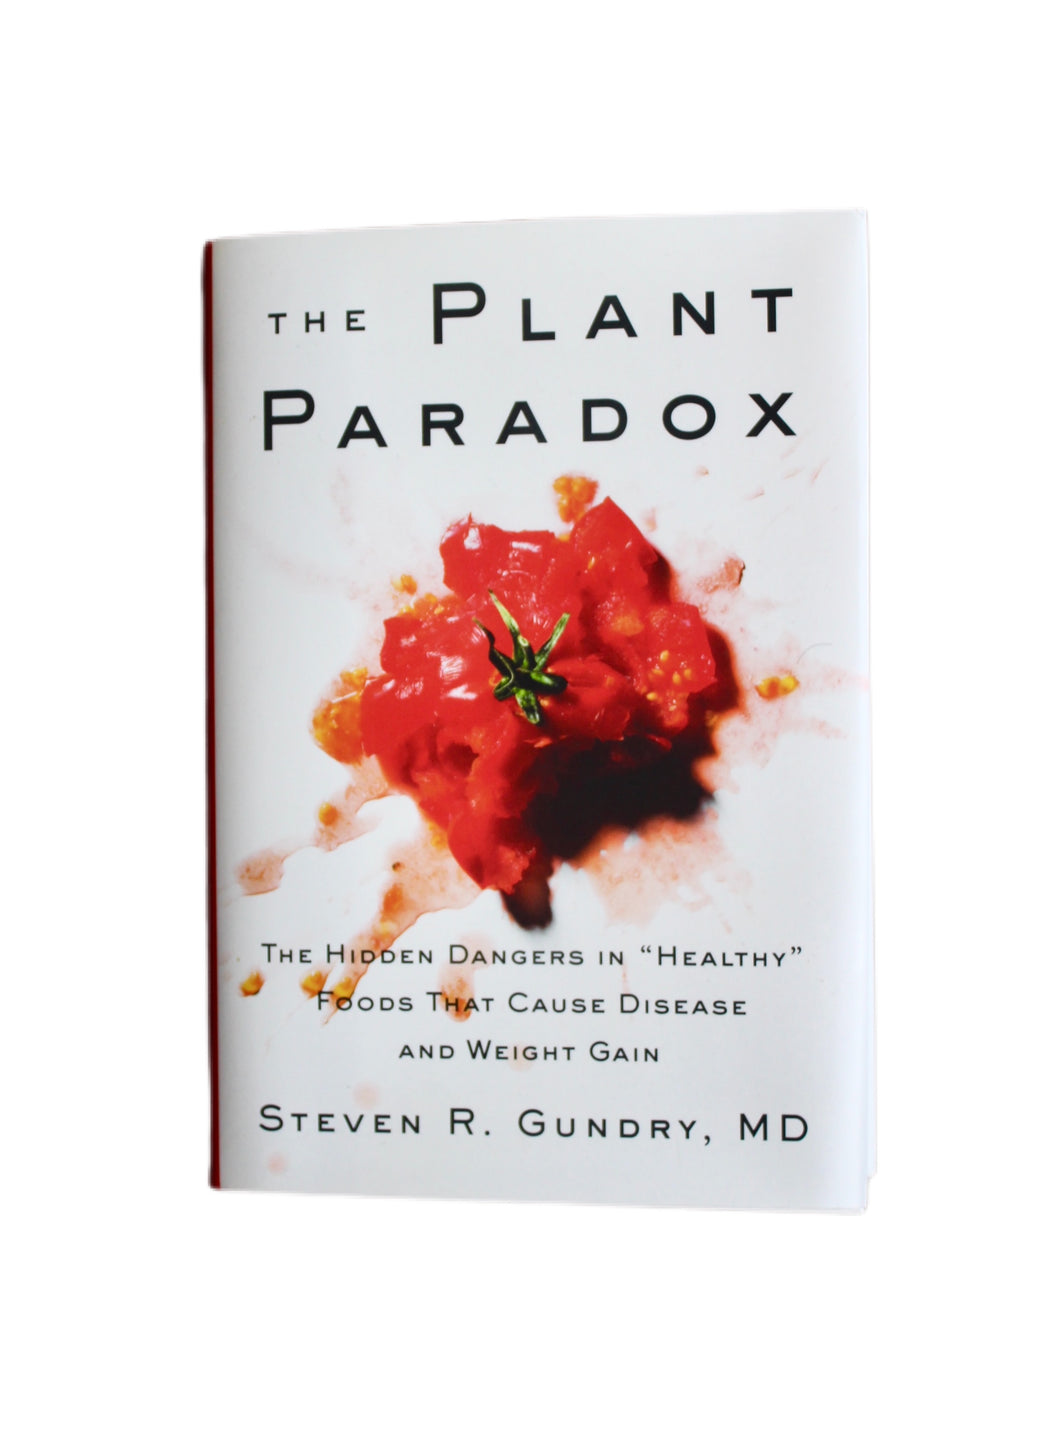 The Plant Paradox by Steven Gundry (Hardcover)